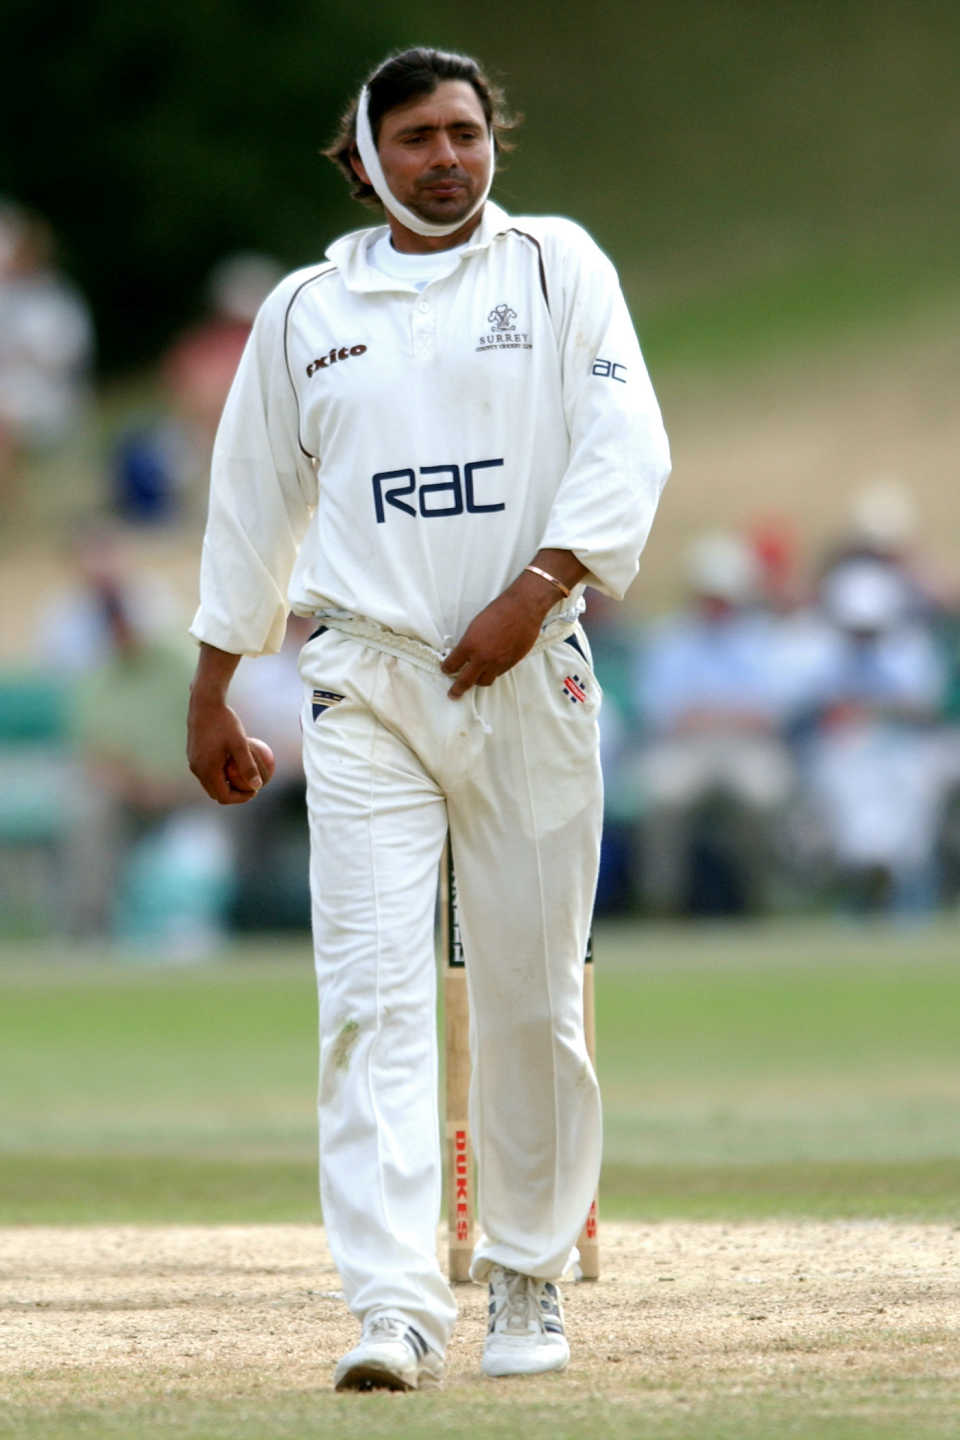 Saqlain Mushtaq attempts to intimidate the opposition with the positioning of his headband